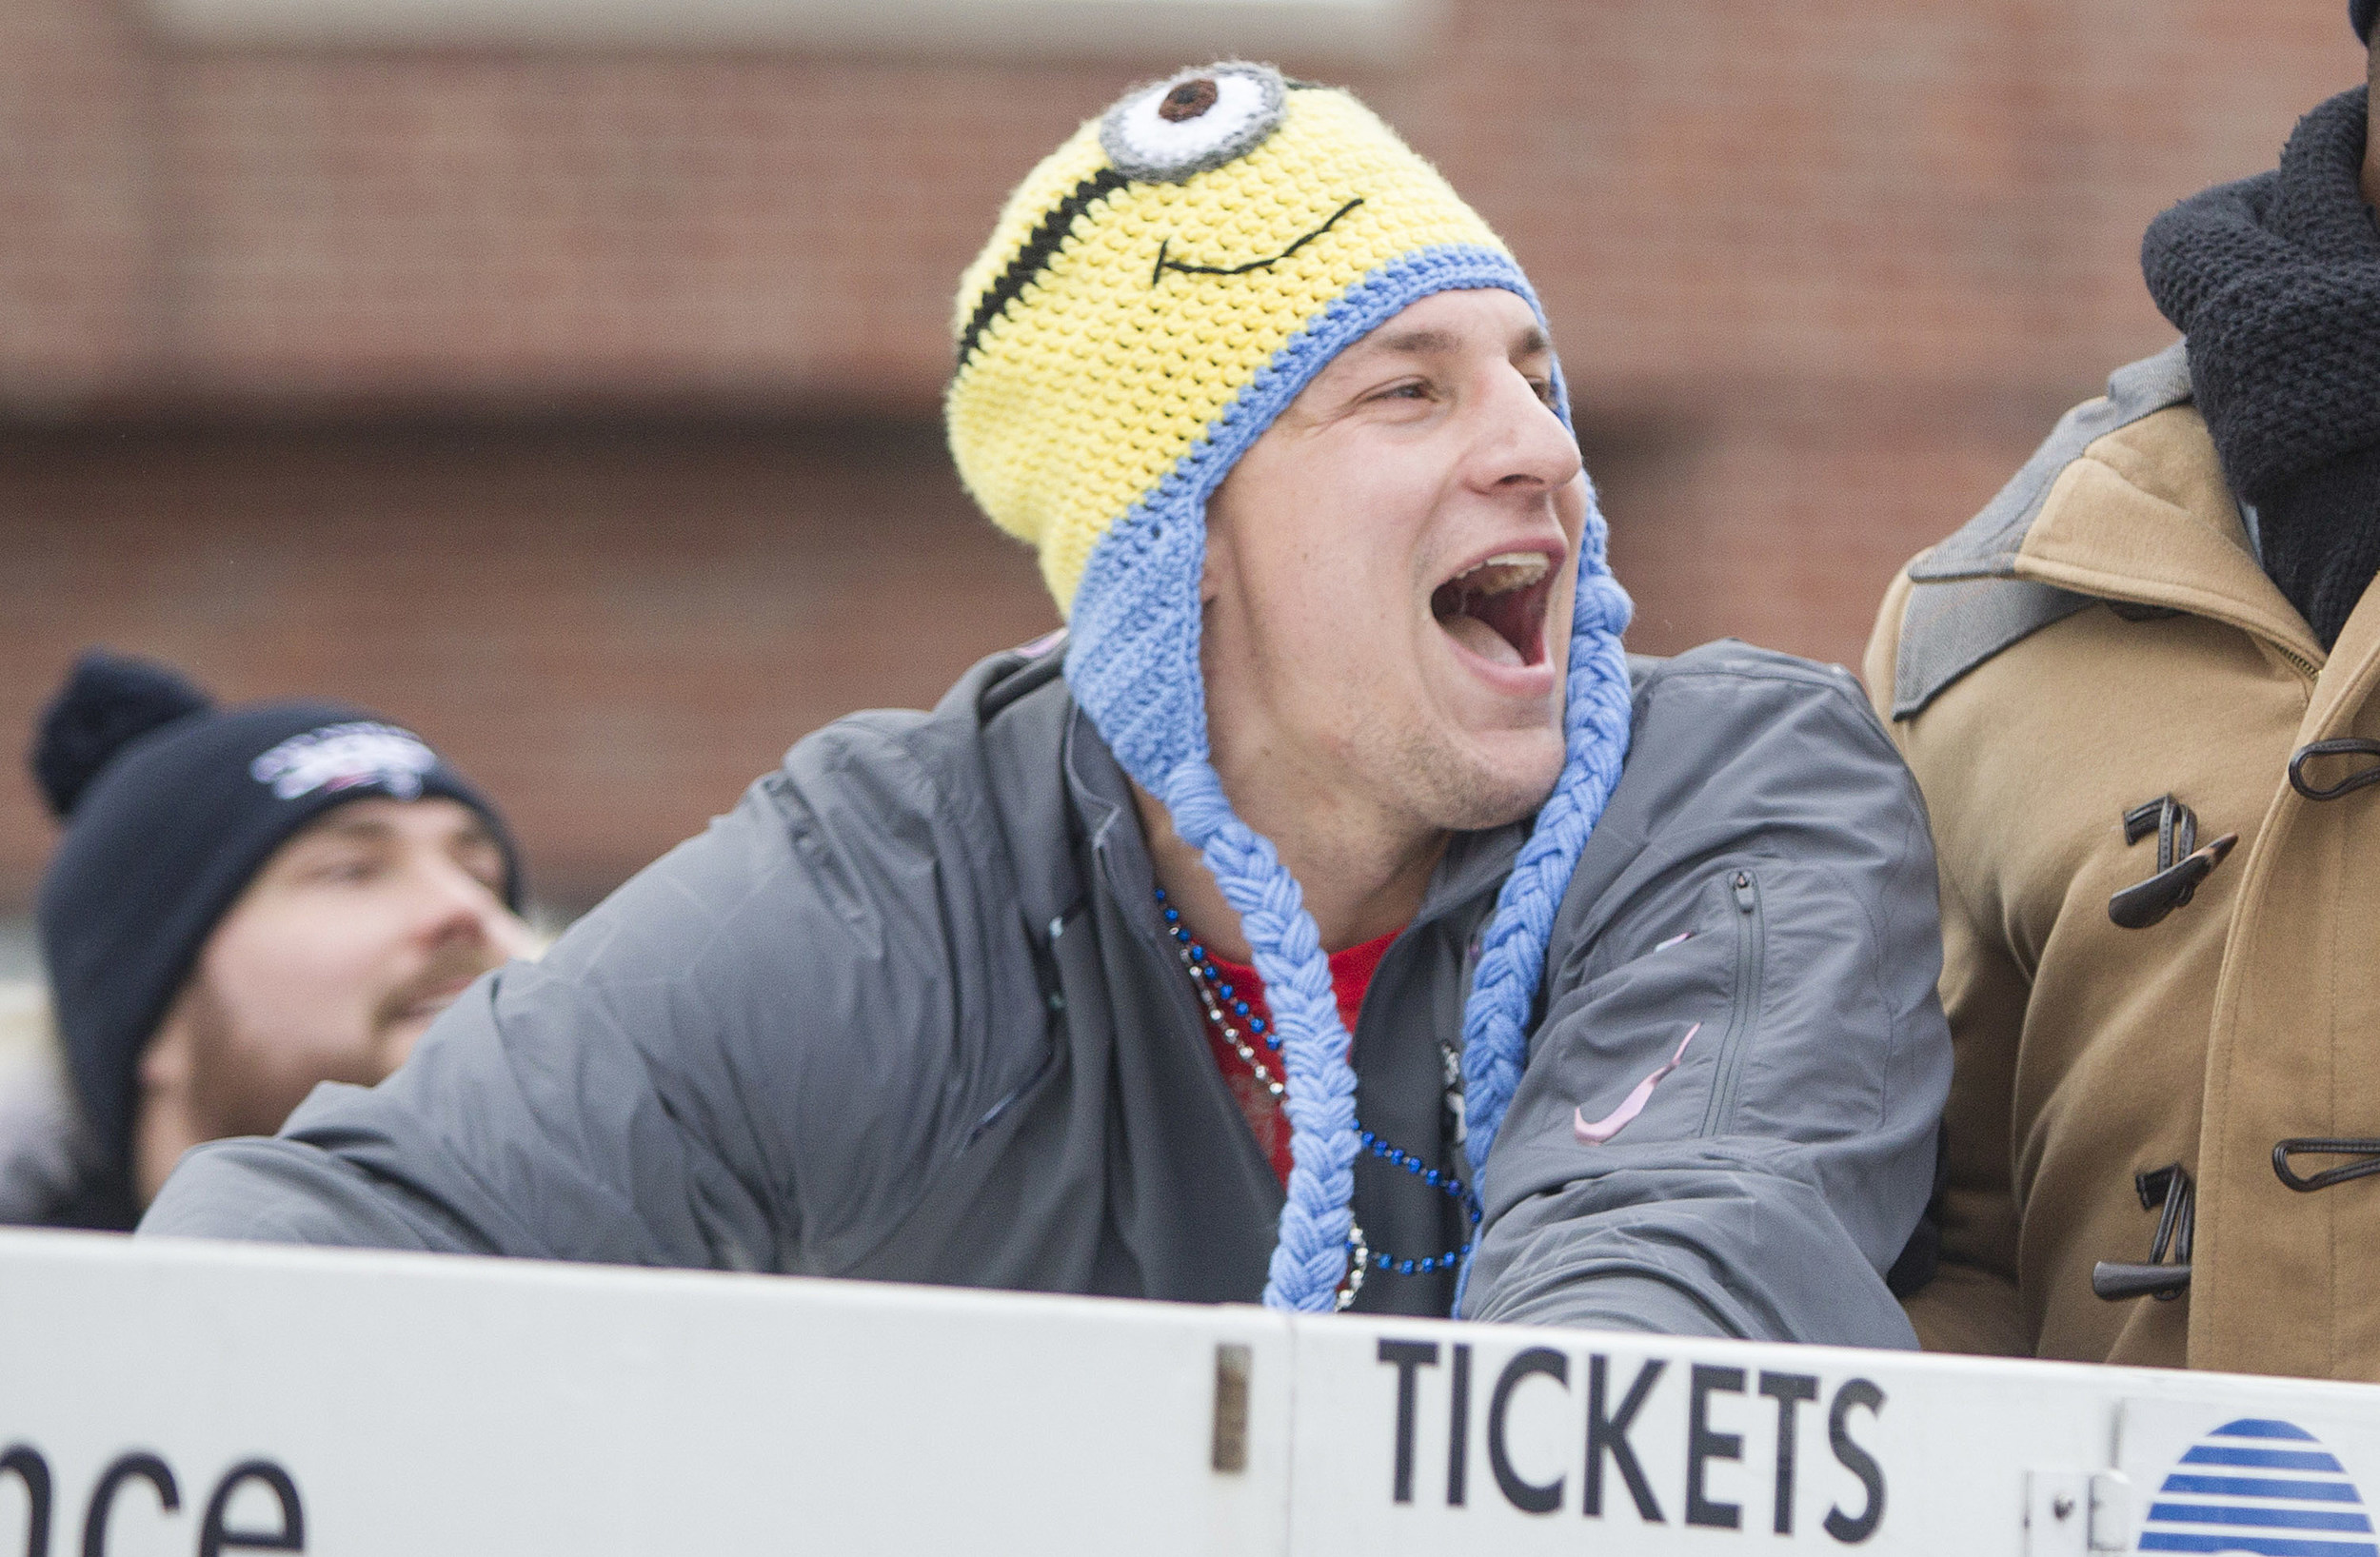 Gronk's Minion Hat Is The Talk Of The Town! [VIDEO] [PICTURES] [MINIONS]